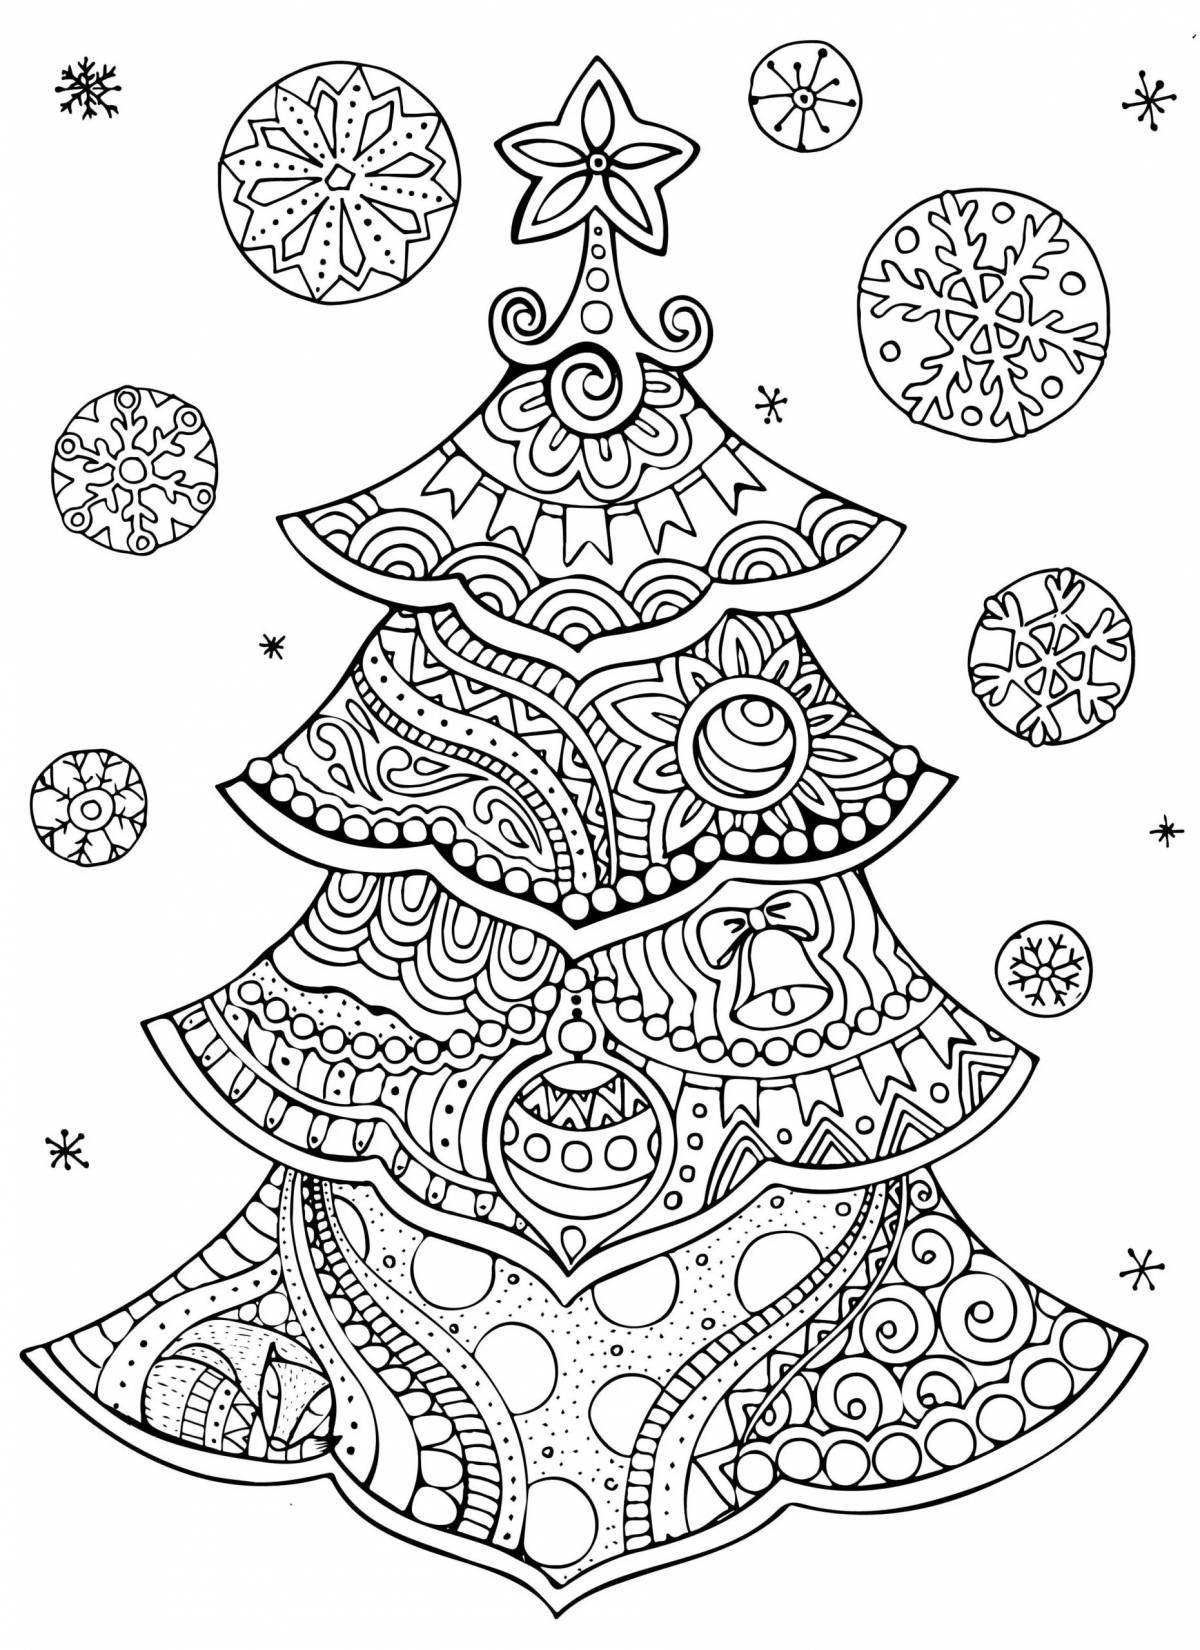 Adorable tree coloring book for girls